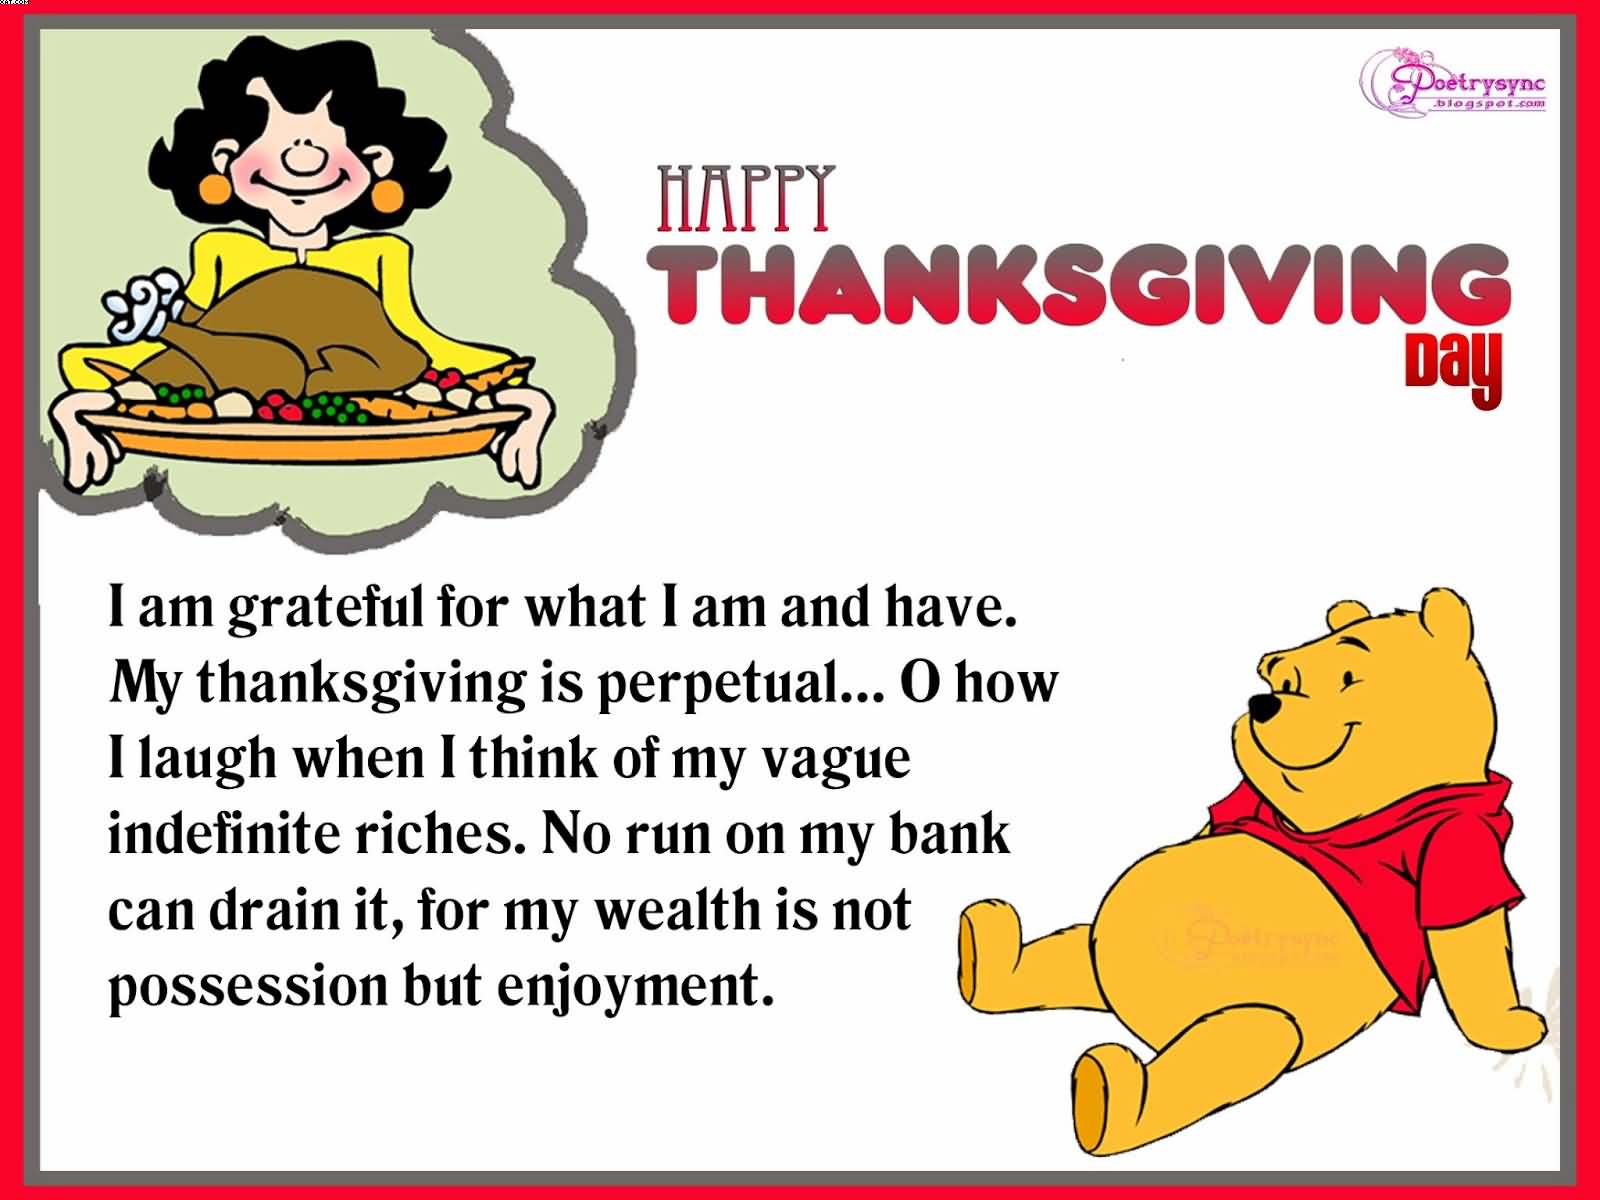 Happy ThanksgivingDay wishes with winnie the pooh wallpaper